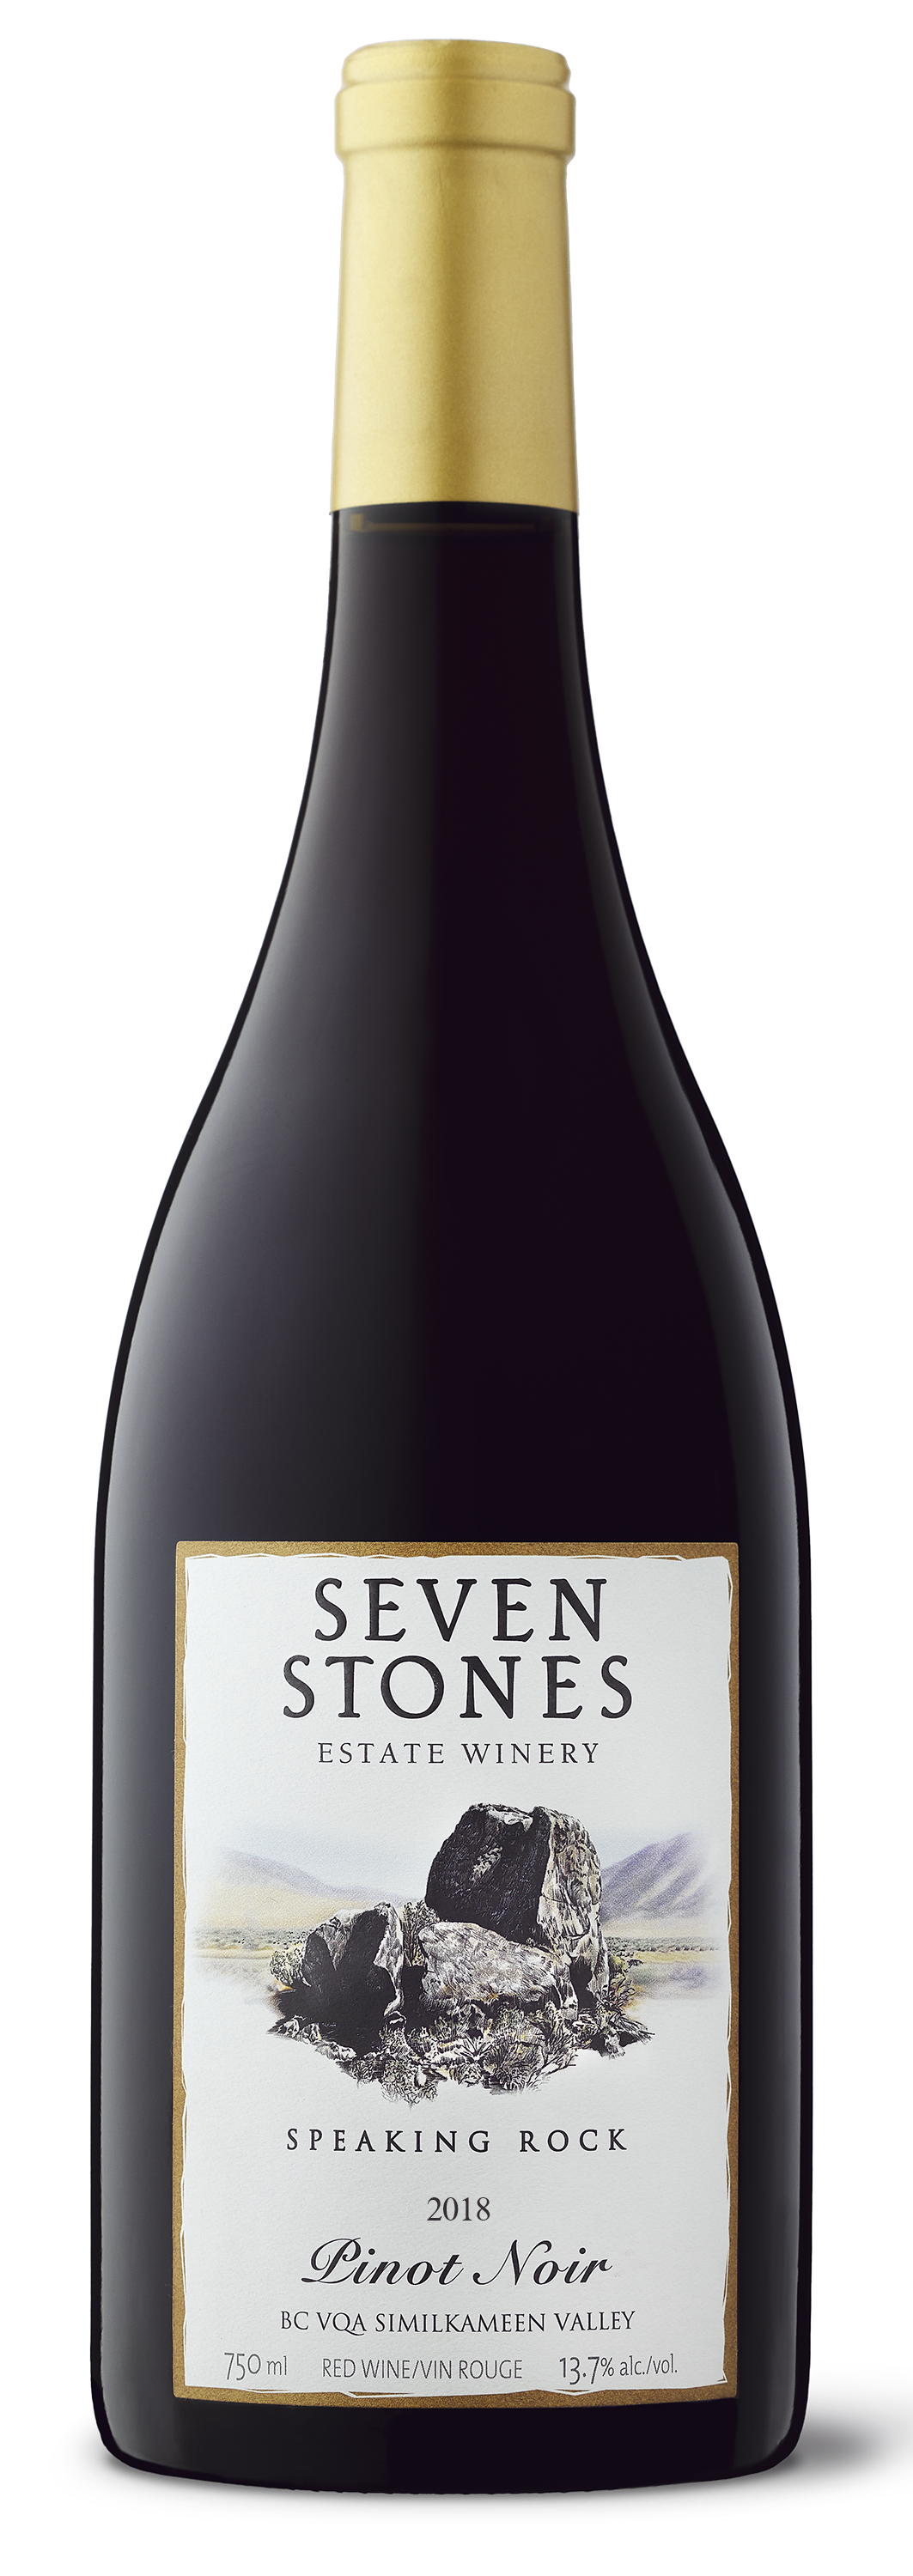 Product Image for 2018 Speaking Rock PINOT NOIR